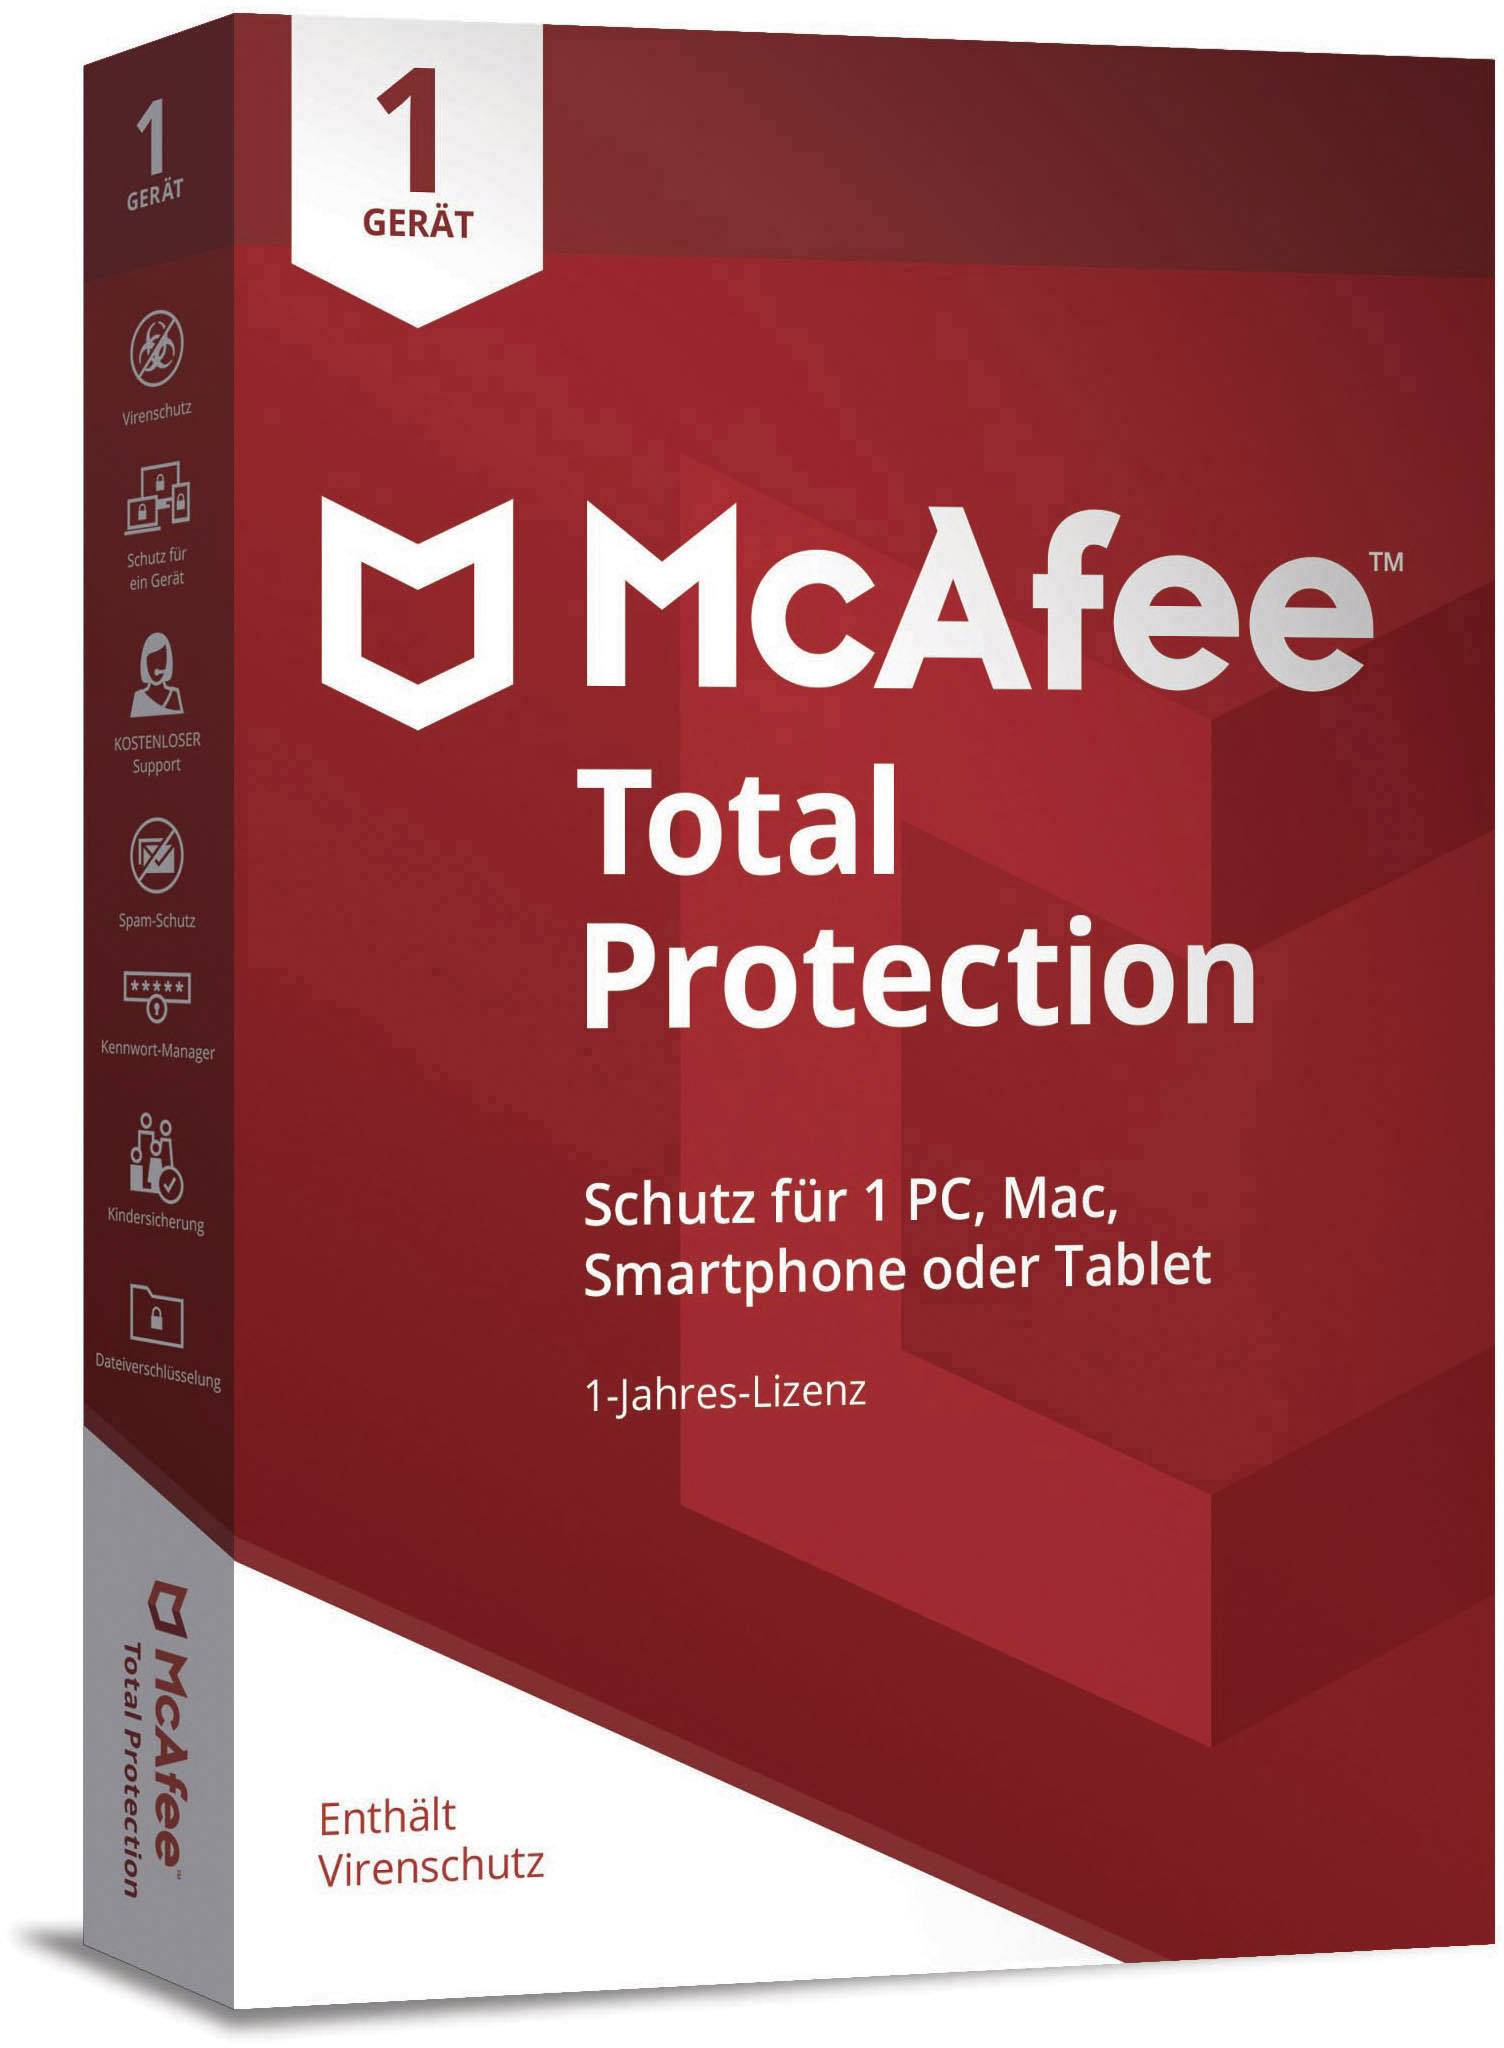 mcafee virus protection for one device